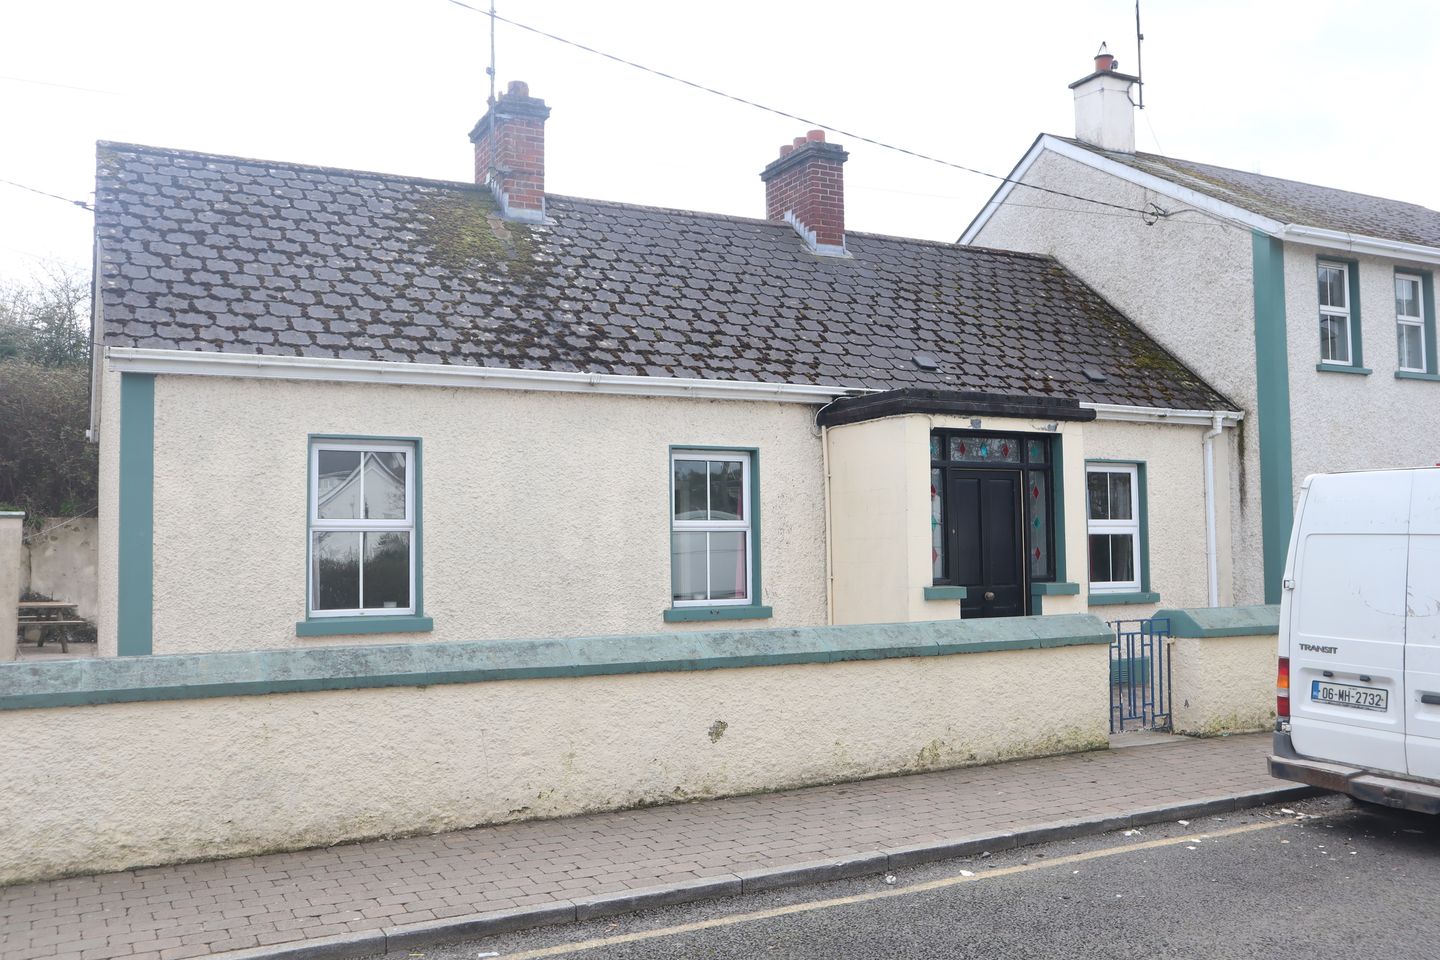 The Bungalow, Chapel Lane, Carrickmacross, Co. Monaghan, A81VY98